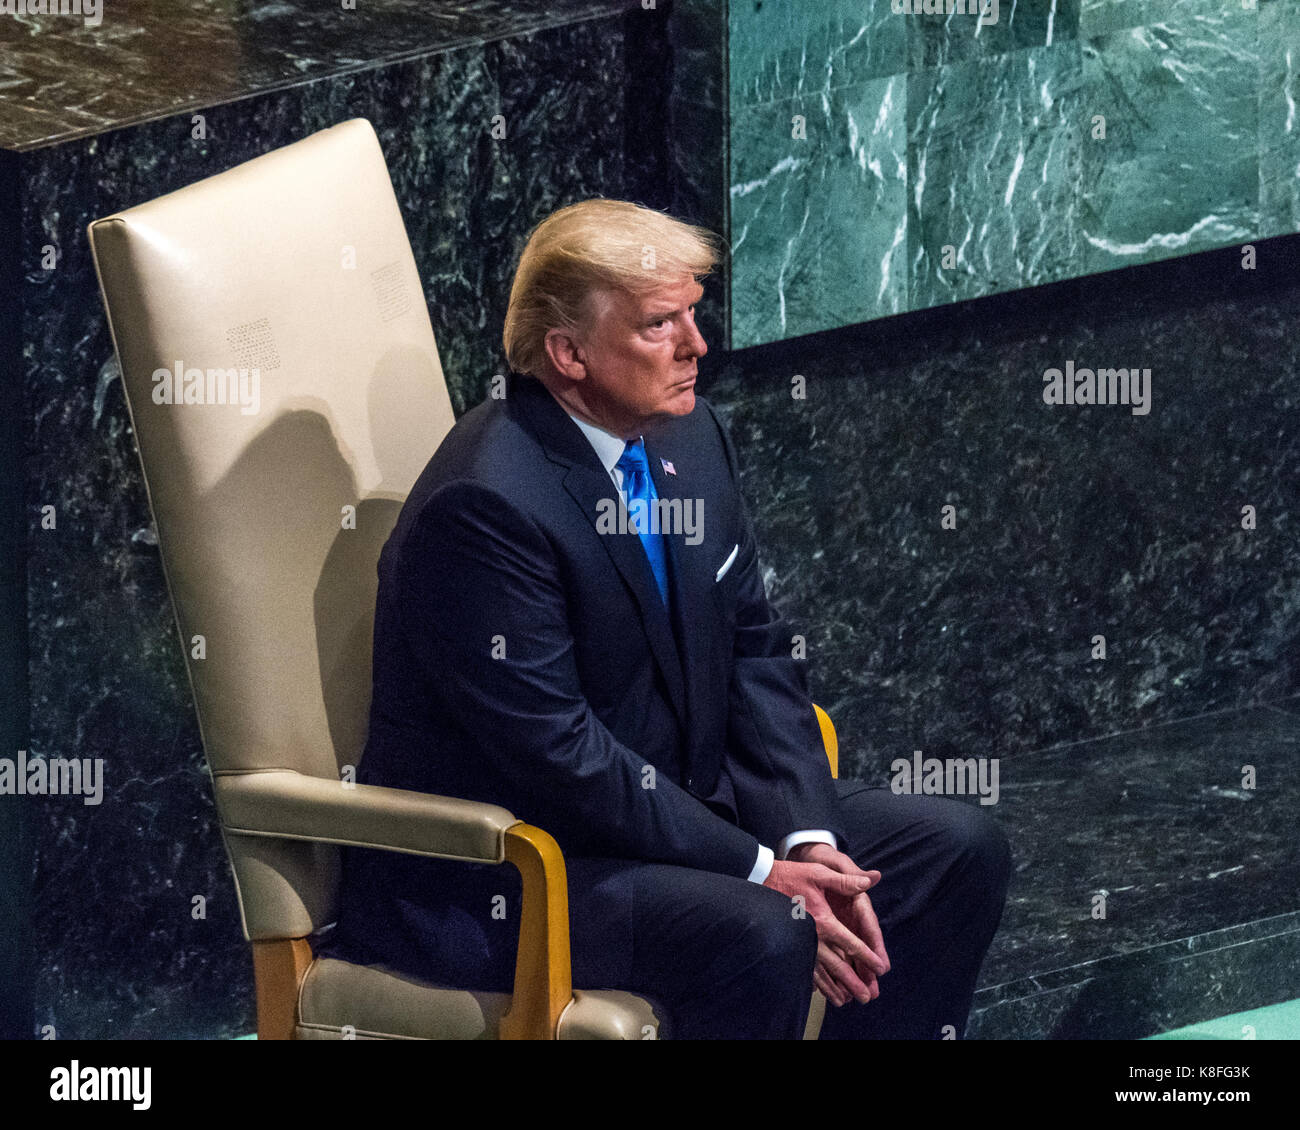 New York, USA, 19 September, 2017.  United States President Donald Trump waits in a protocol chair before addressing the opening session of the 72st United Nations General Assembly in New York on September 17, 2017. Trump used his first ever address to the U.N. General Assembly to condemn North Korea and Iran. Enrique Shore/Alamy Live News Stock Photo